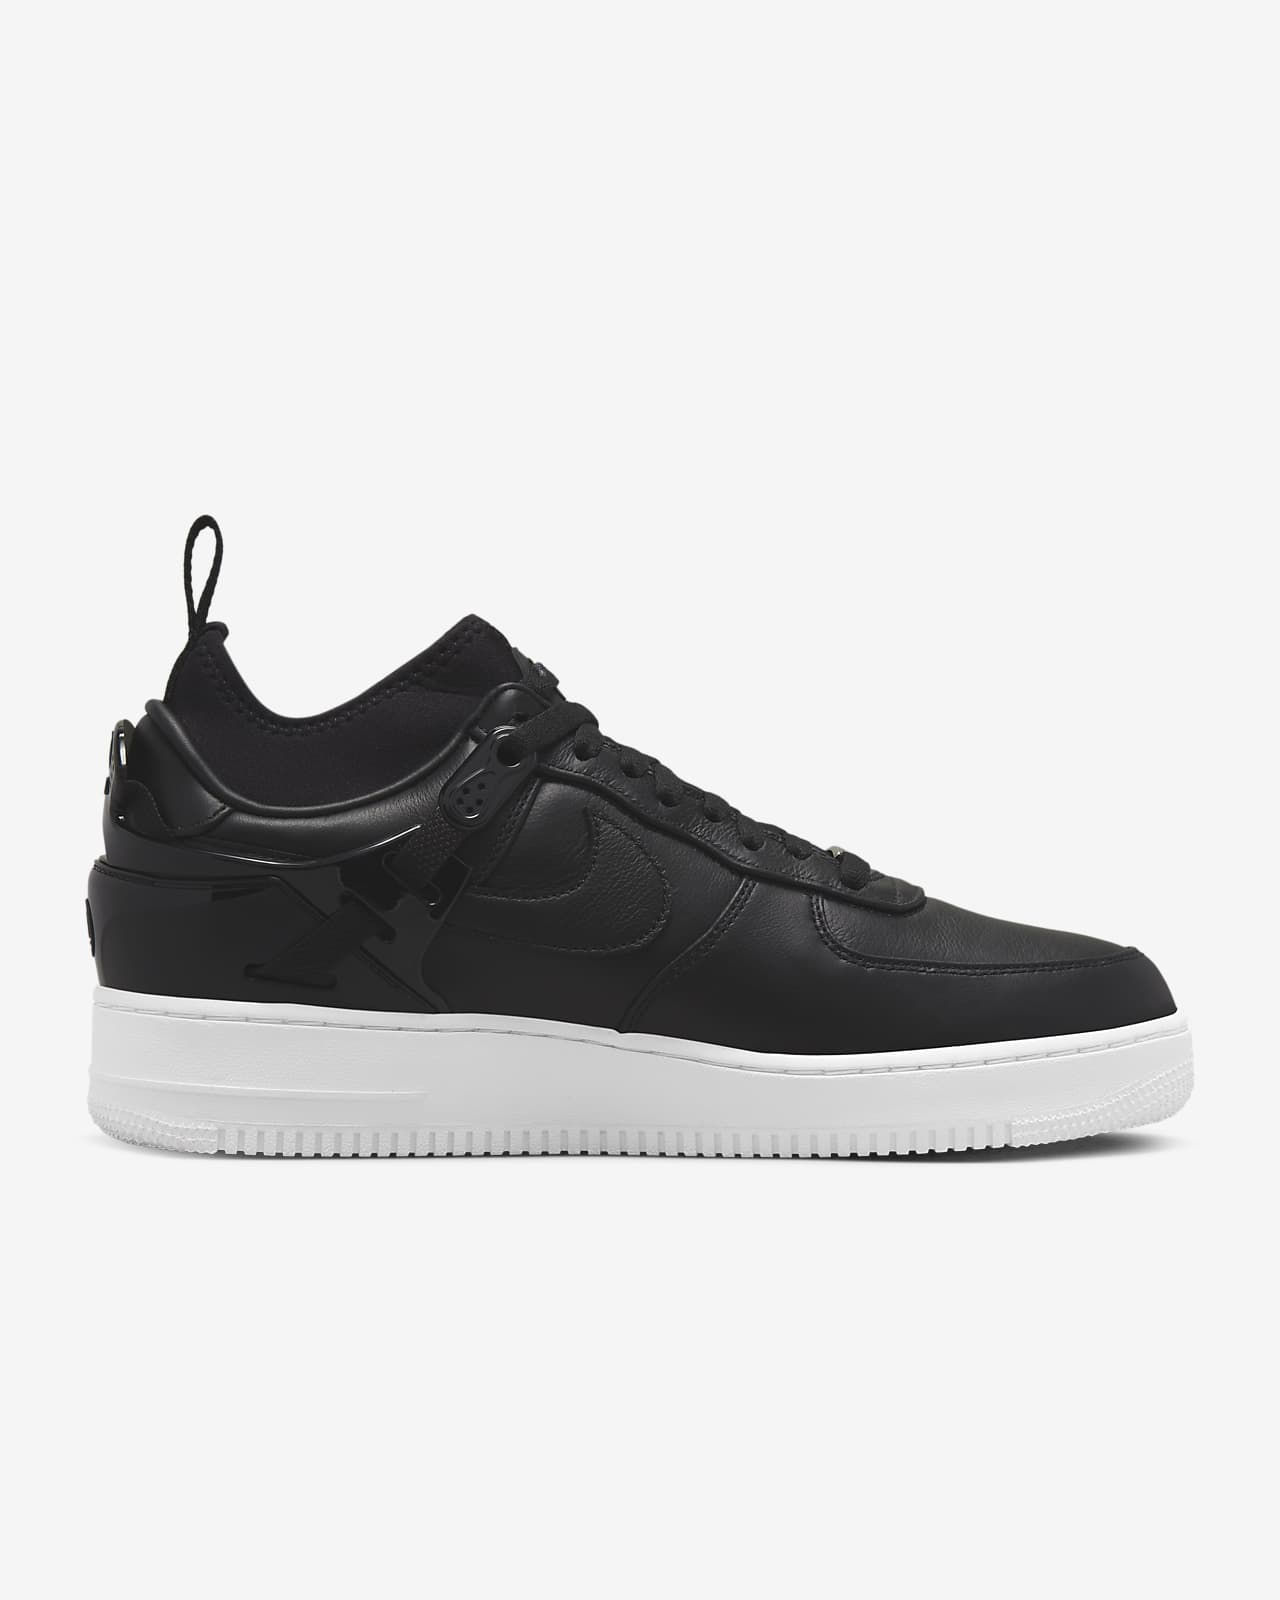 Nike Men's Air Force 1 Low SP Undercover Shoes